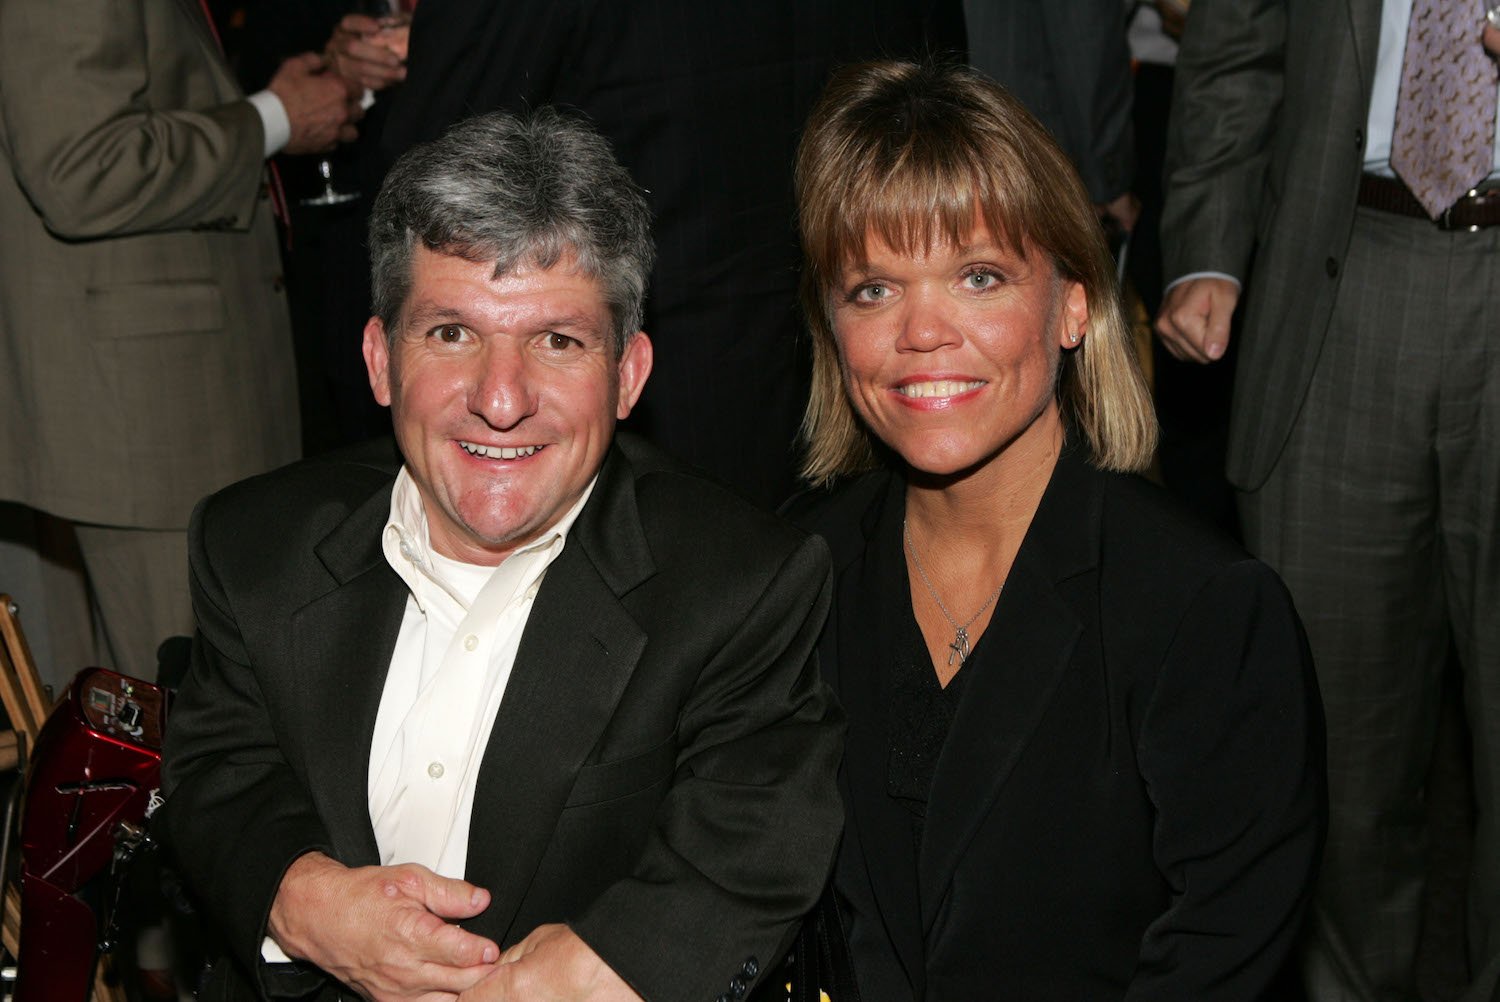 Matt Roloff and Amy Roloff from 'Little People, Big World' smiling